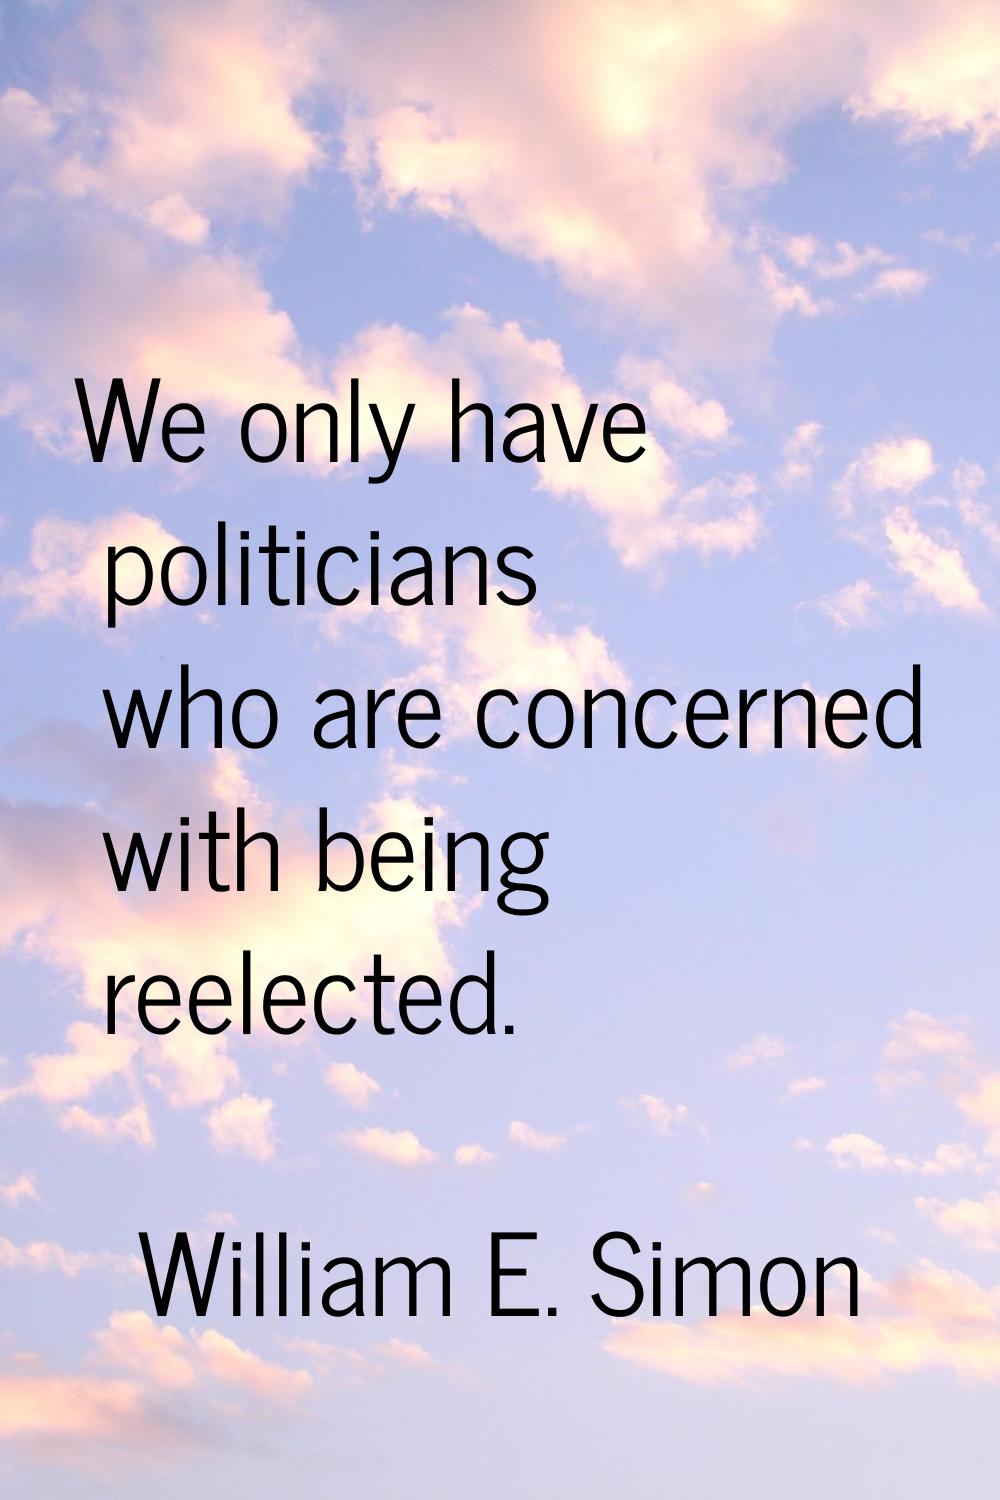 We only have politicians who are concerned with being reelected.